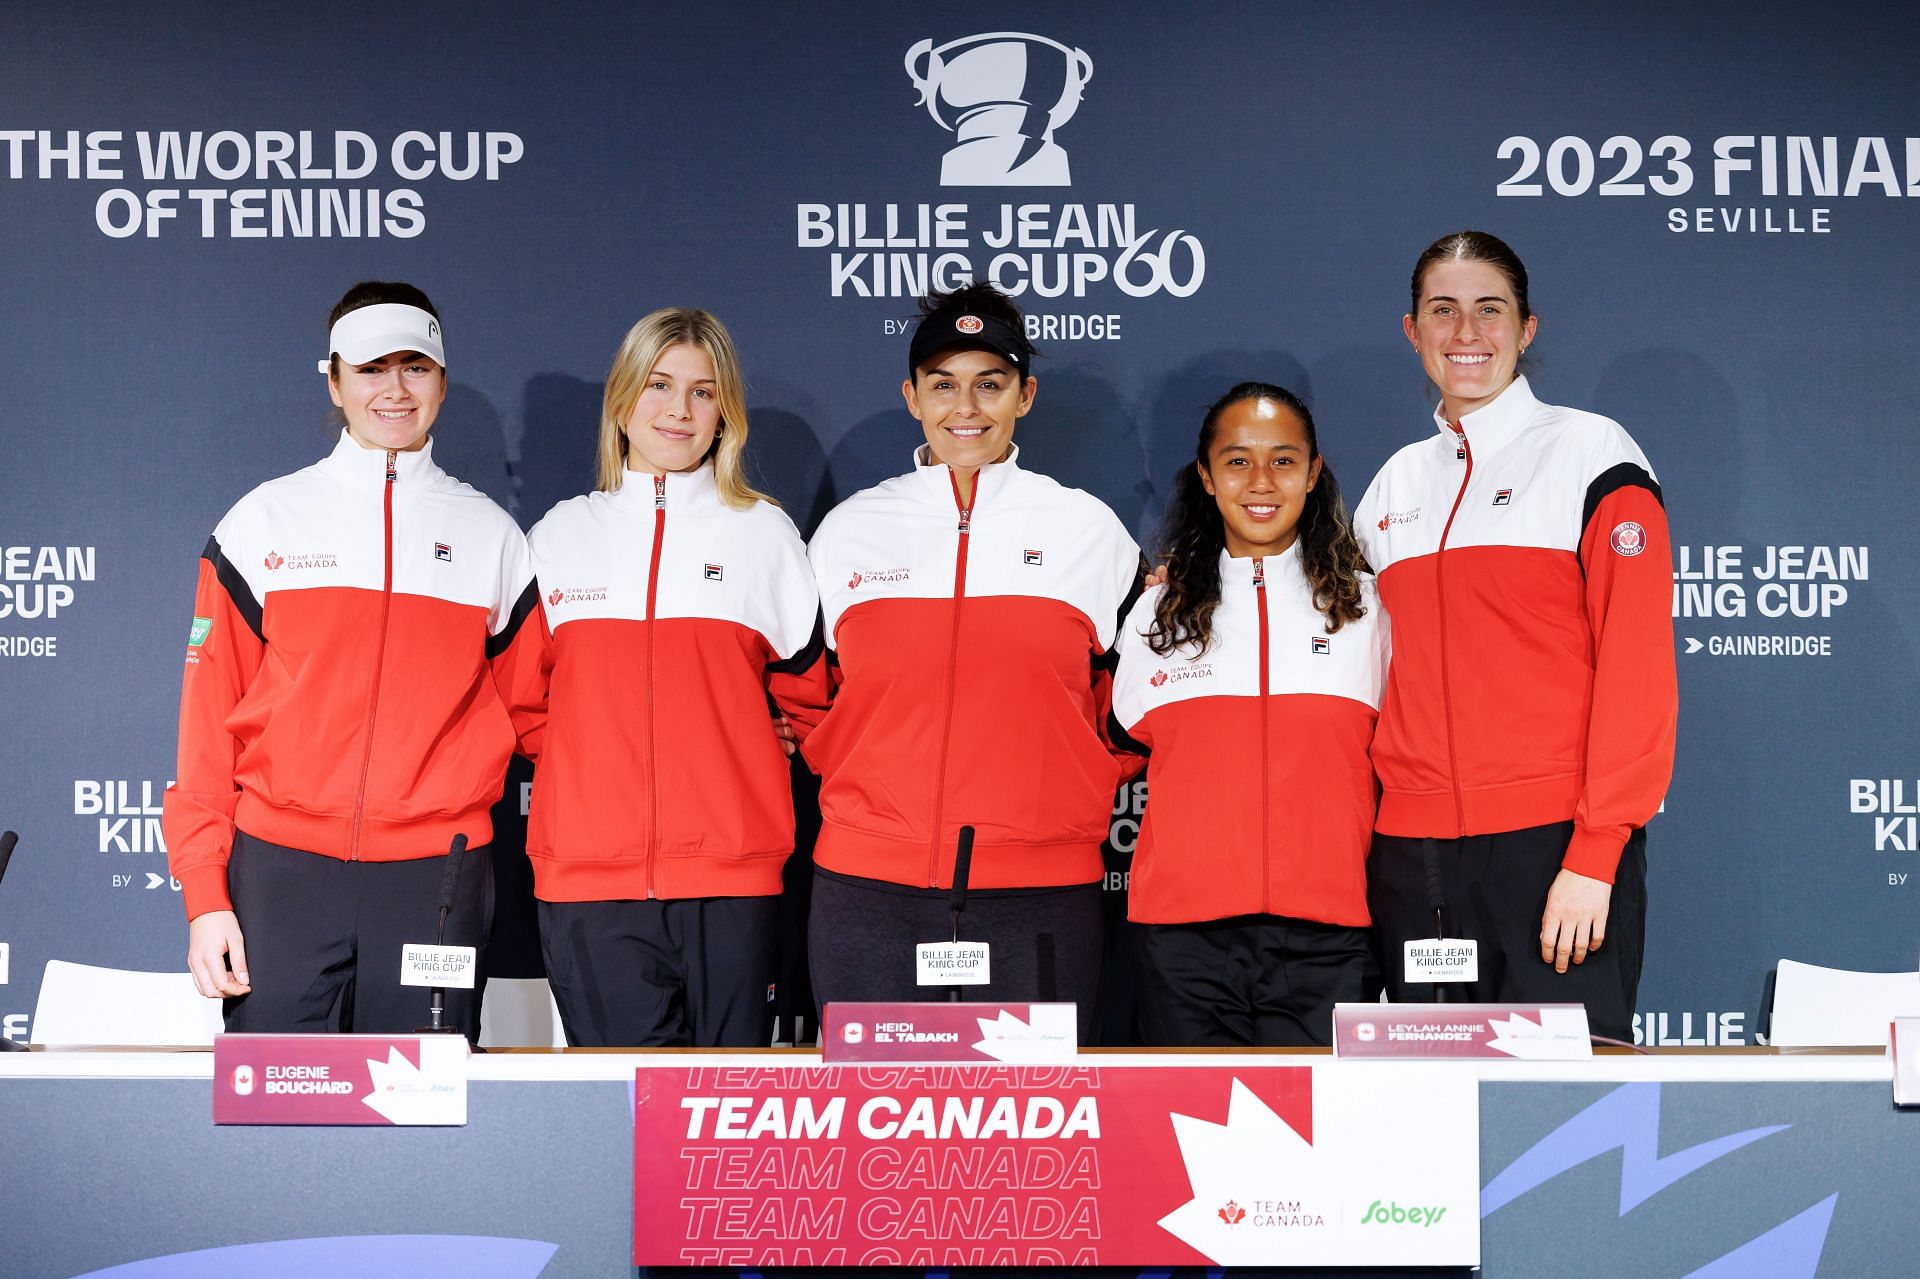 Team Canada at the 2023 Billie Jean King Cup Finals